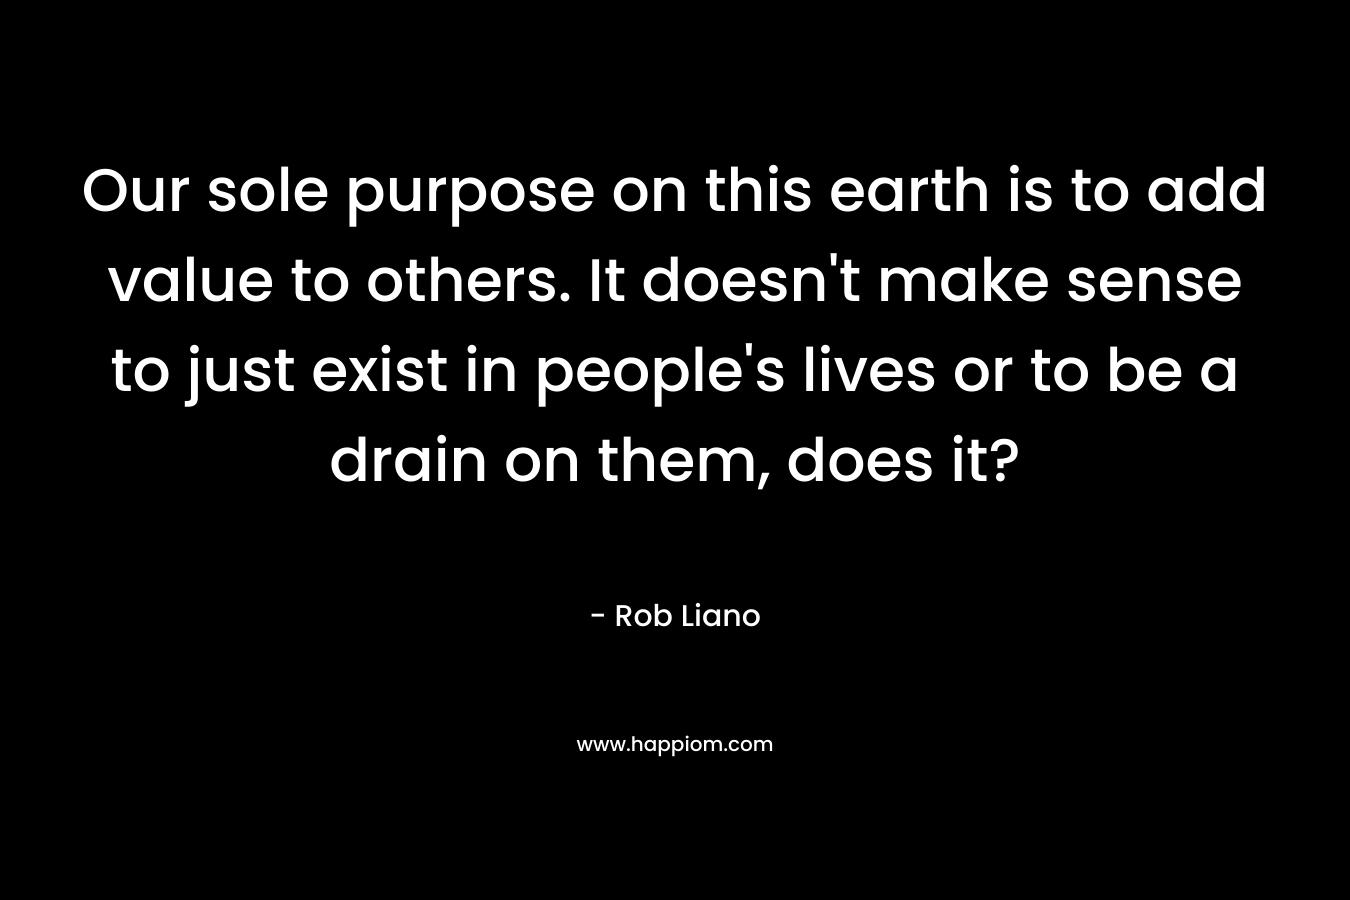 Our sole purpose on this earth is to add value to others. It doesn't make sense to just exist in people's lives or to be a drain on them, does it?